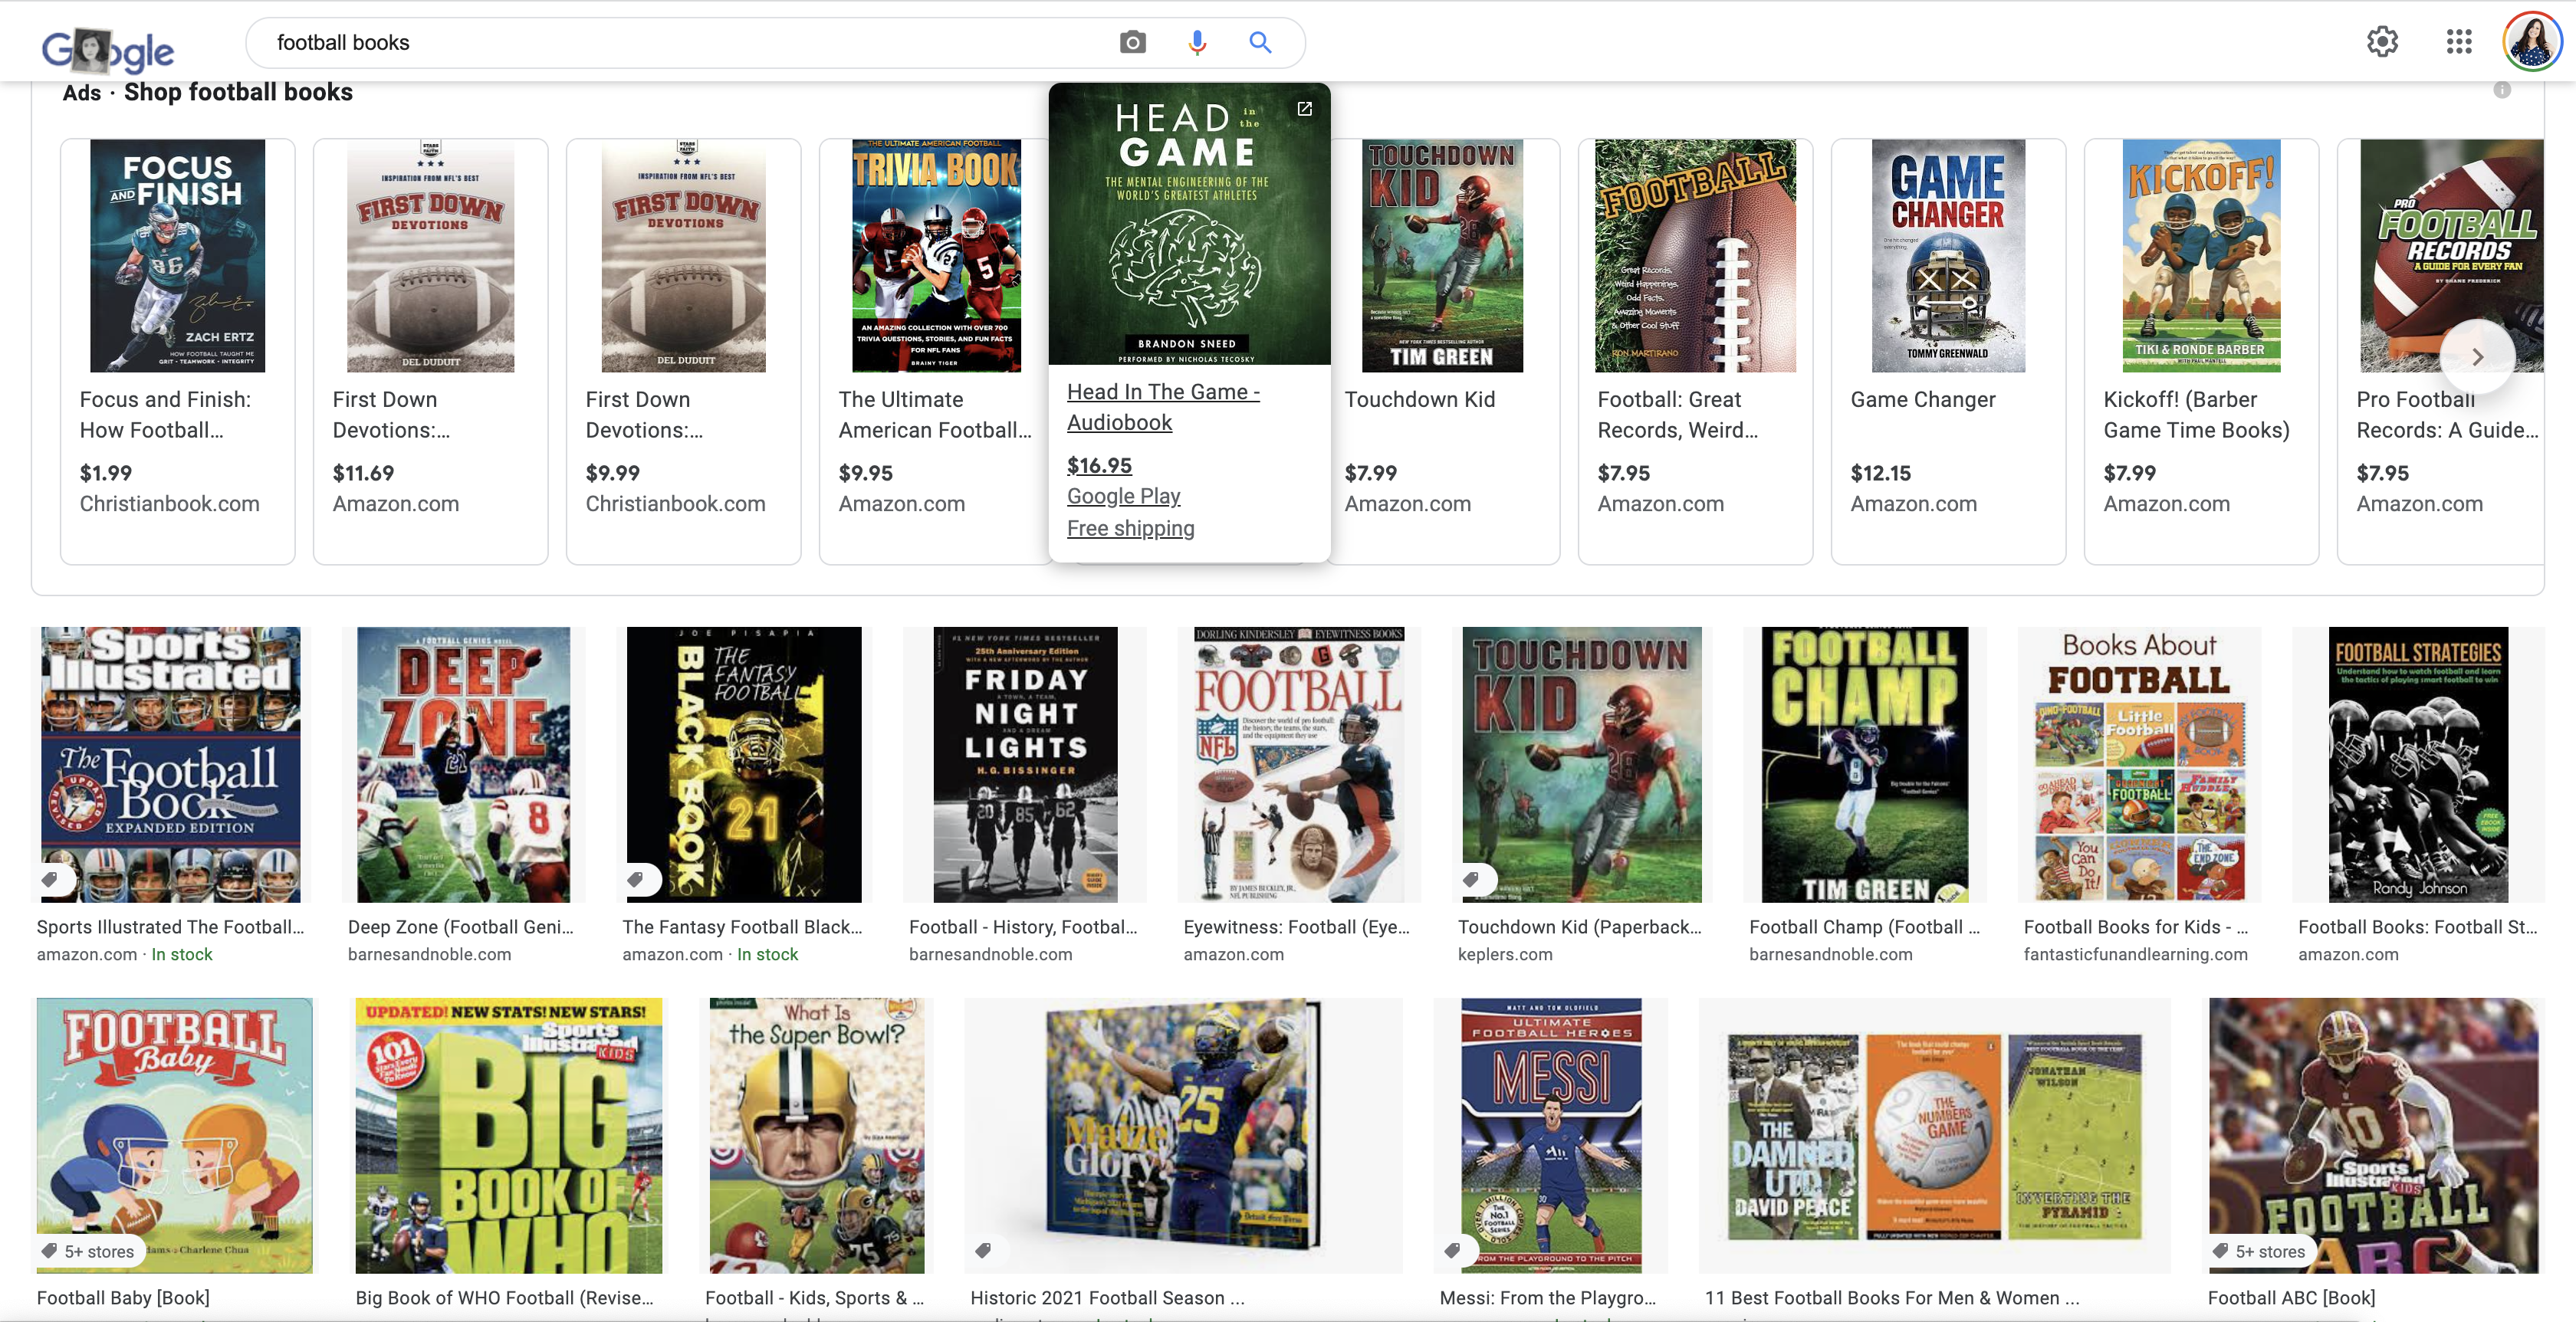 Inspirational books written by football coaches are good football gifts for football players.